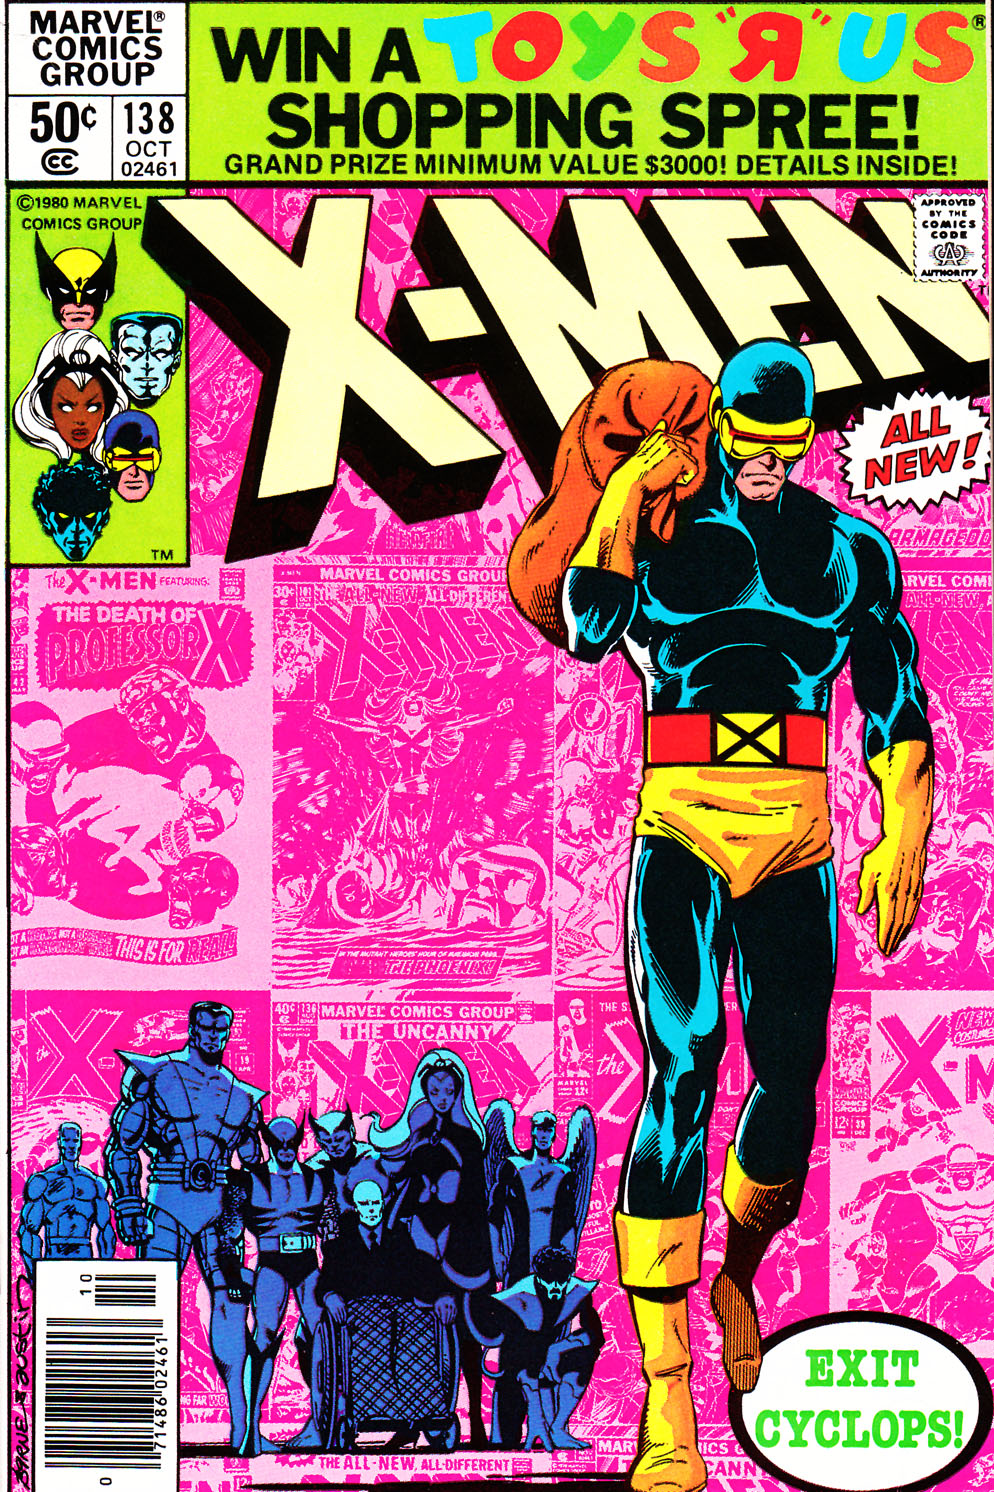 x000_Cover_UCXM138-01